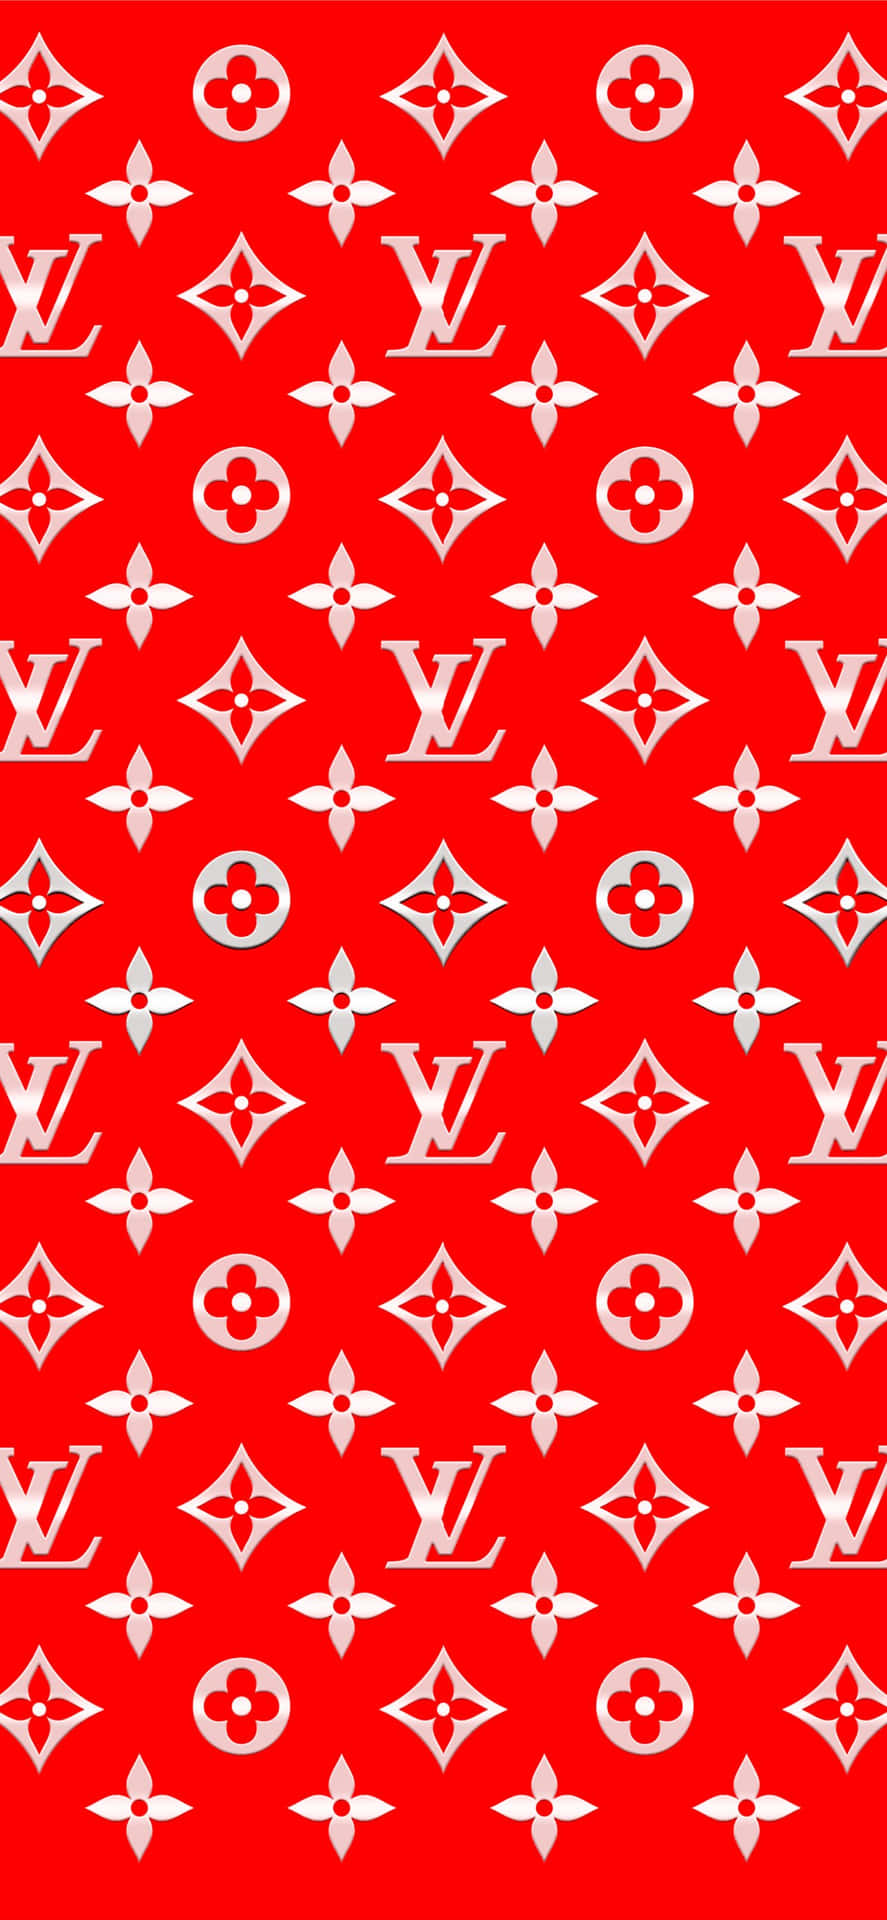 Background Louis Vuitton Wallpaper Discover more Accessories